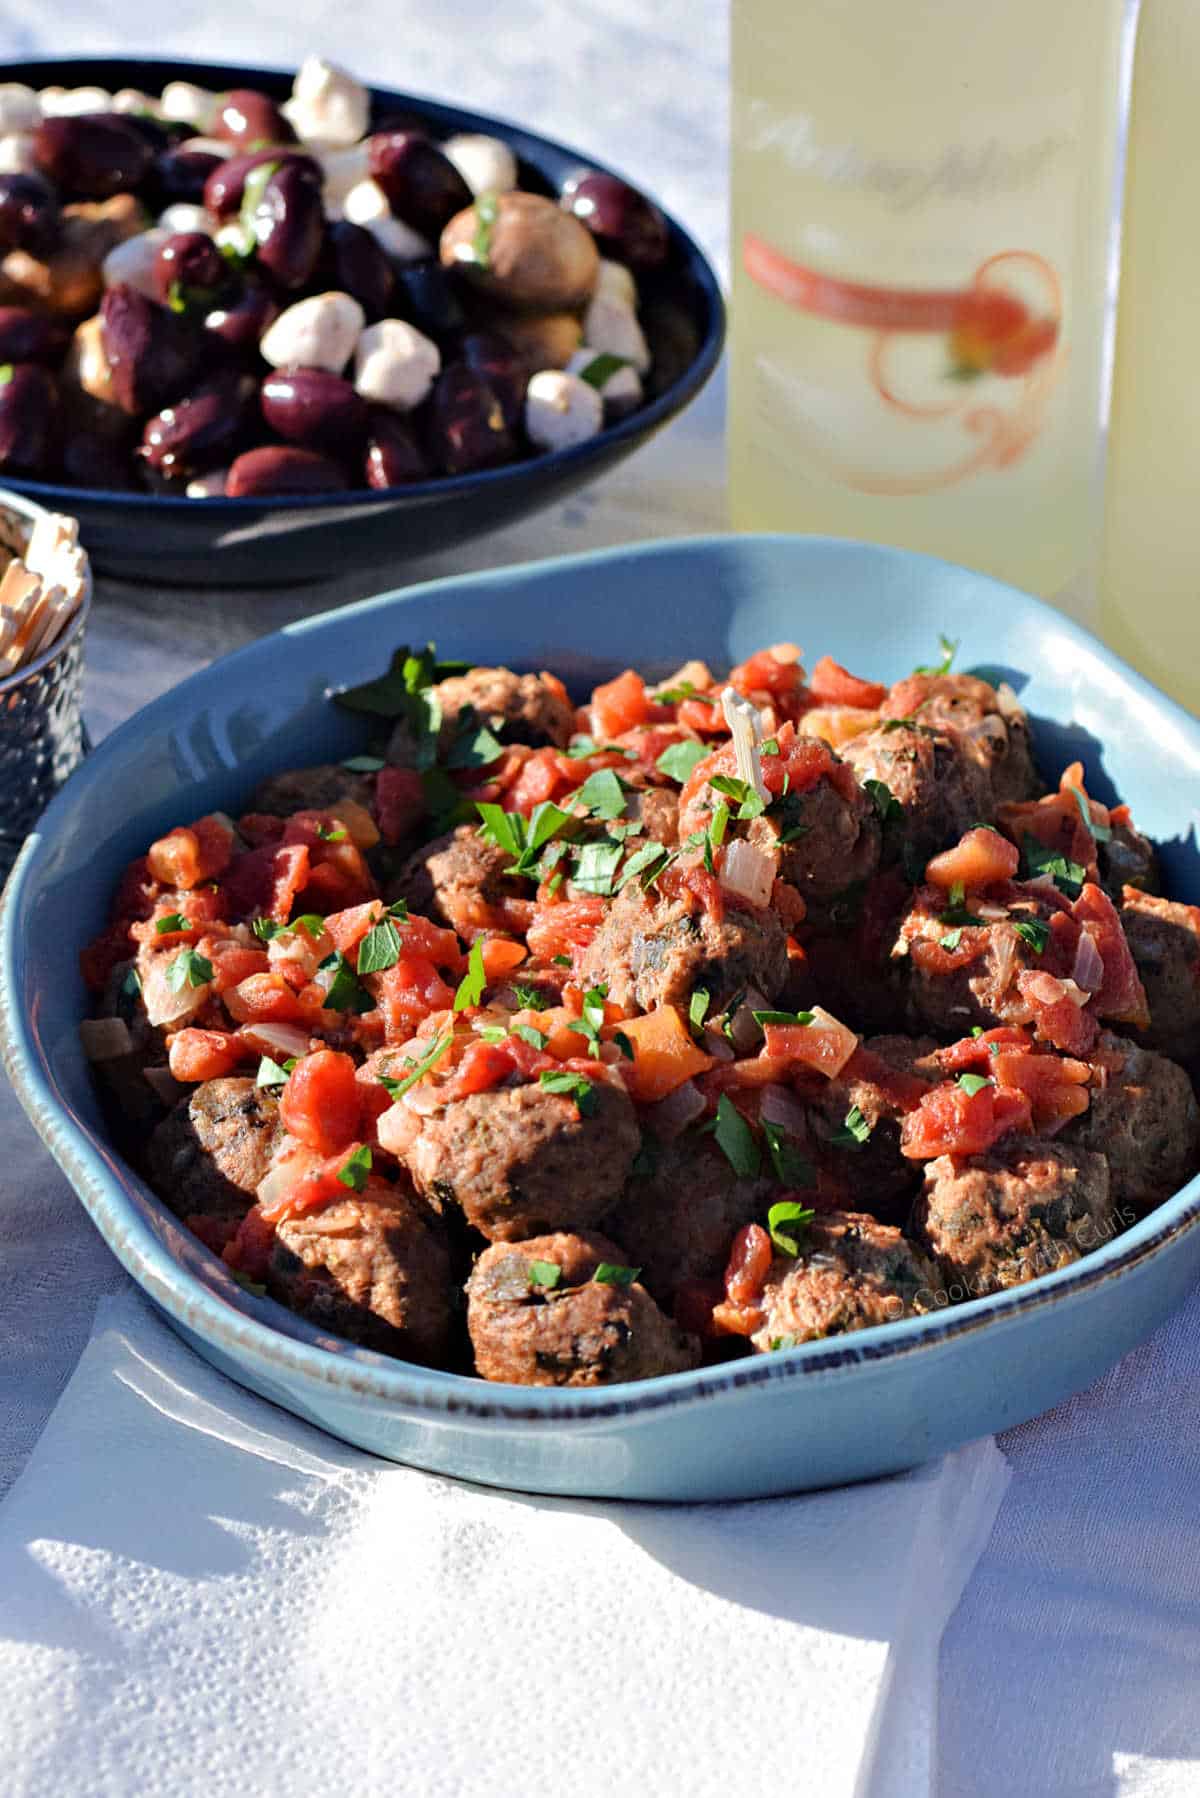 Spanish meatballs with tomato sauce in a serving bowl with a bowl of olives and mushrooms in the background.